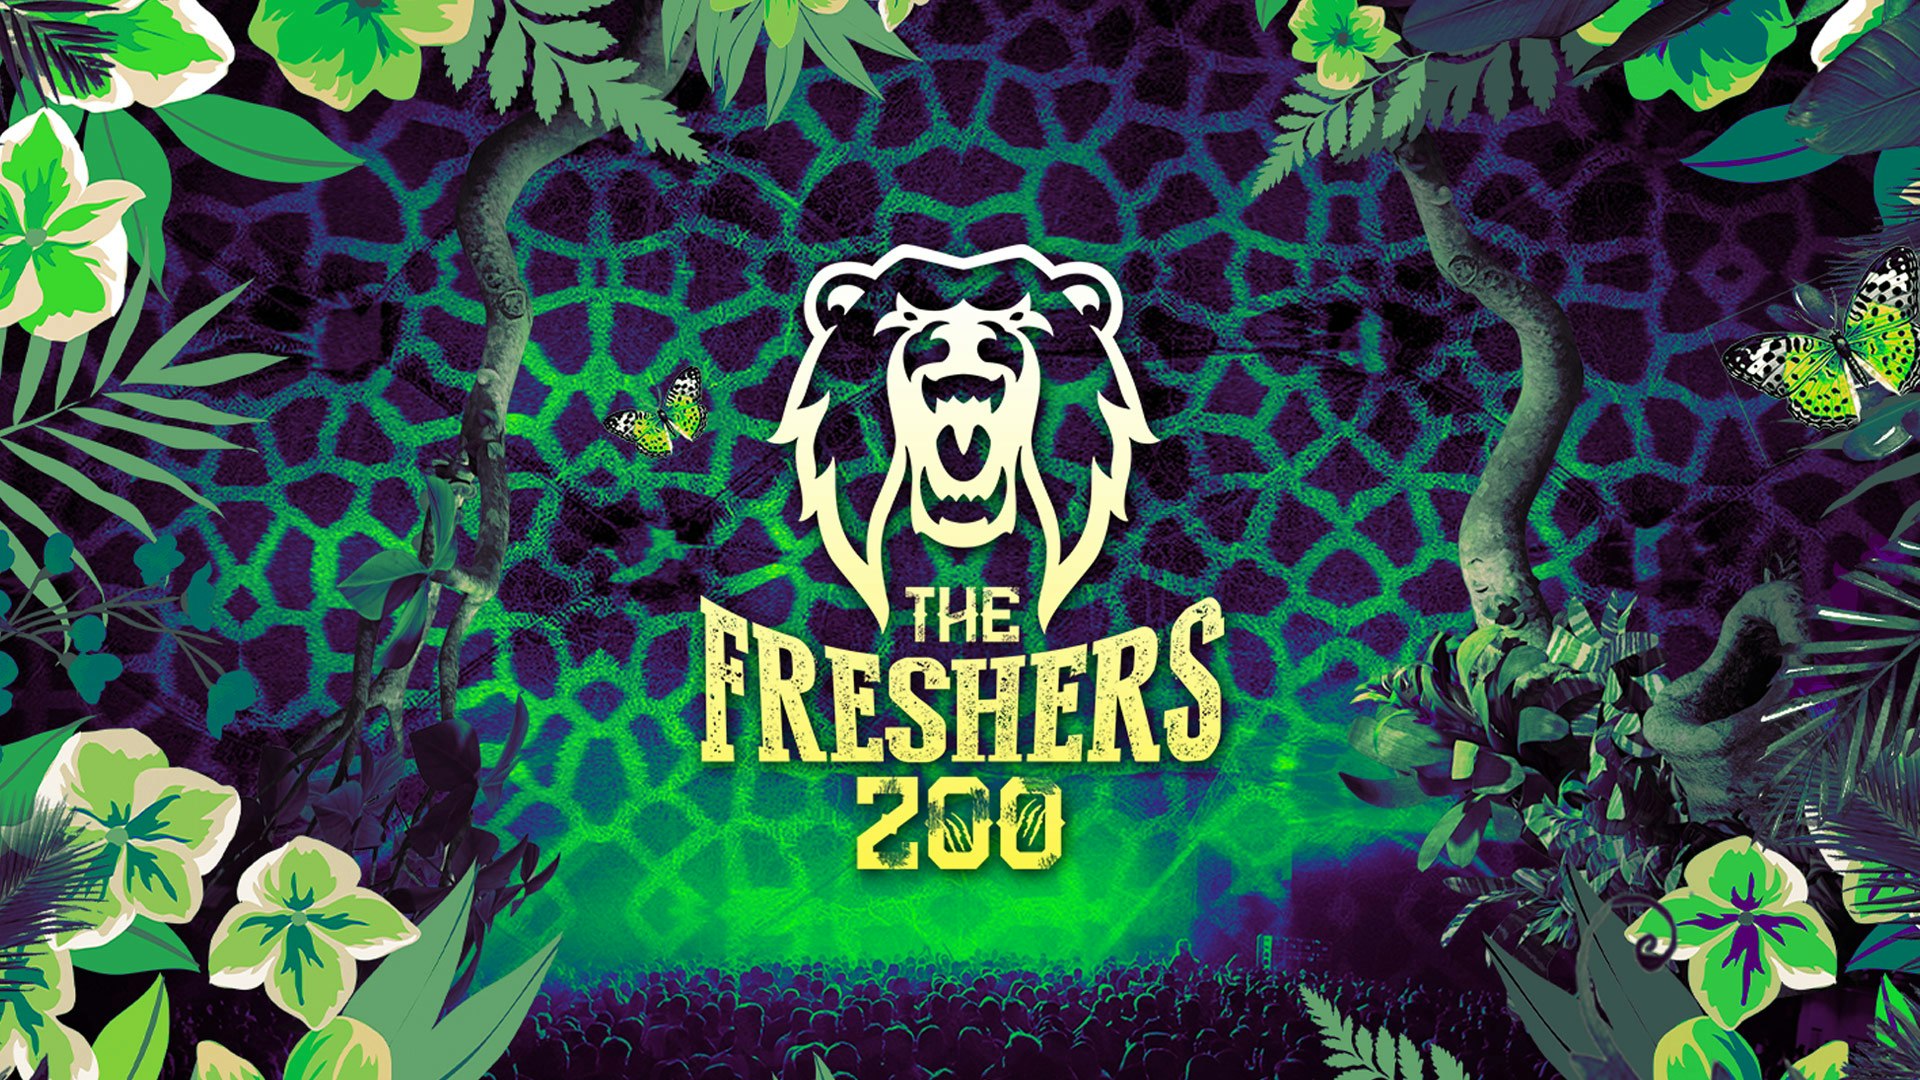 The Freshers Zoo | Coventry Freshers 2021 – Final 50 Tickets!